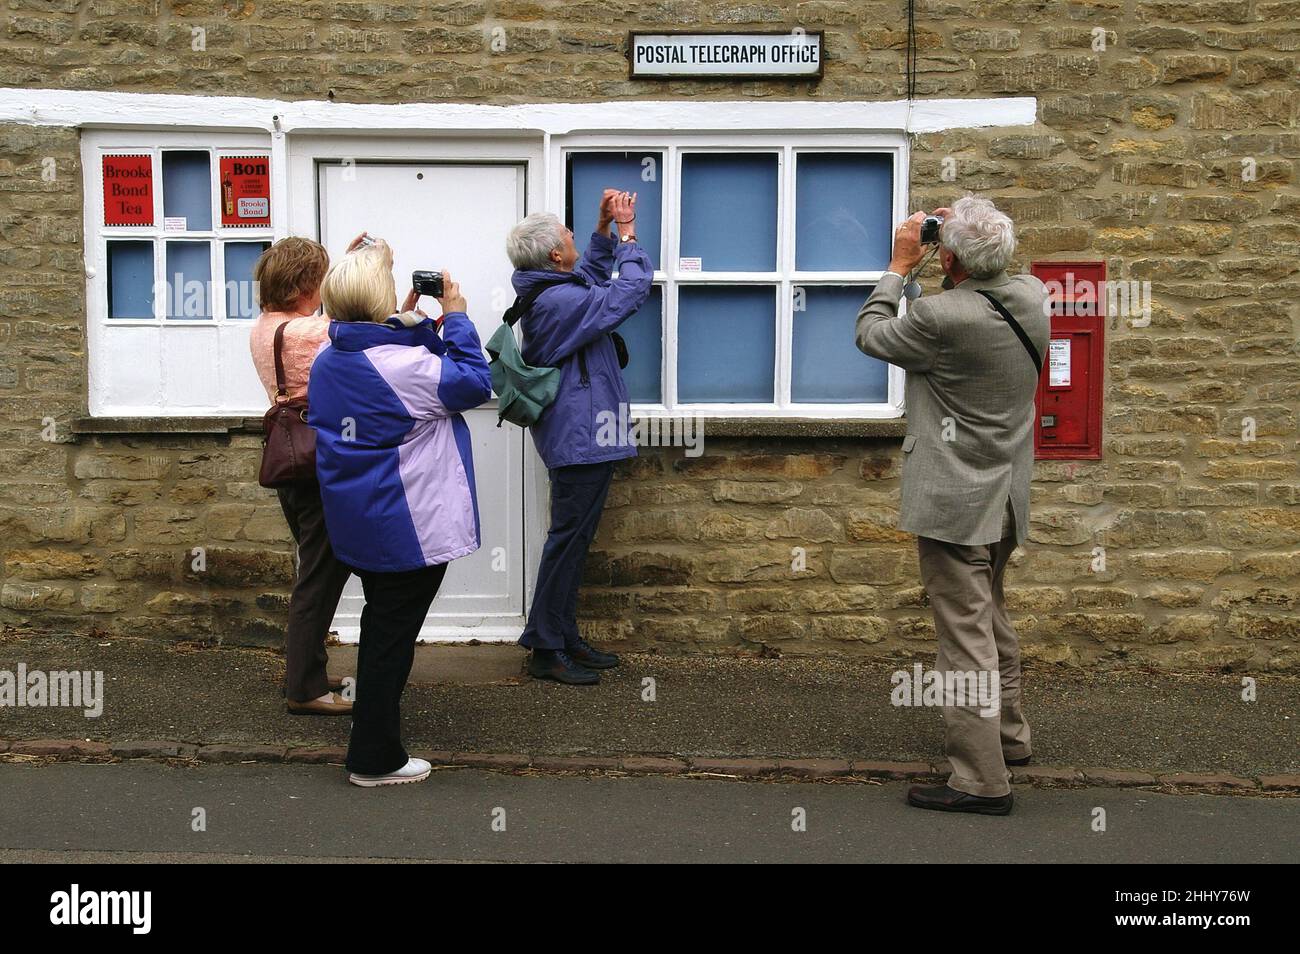 Four amateur photographers taking shots of the historic Postal Telegraph Office in the village of Wadenhoe, Northamptonshire, UK Stock Photo